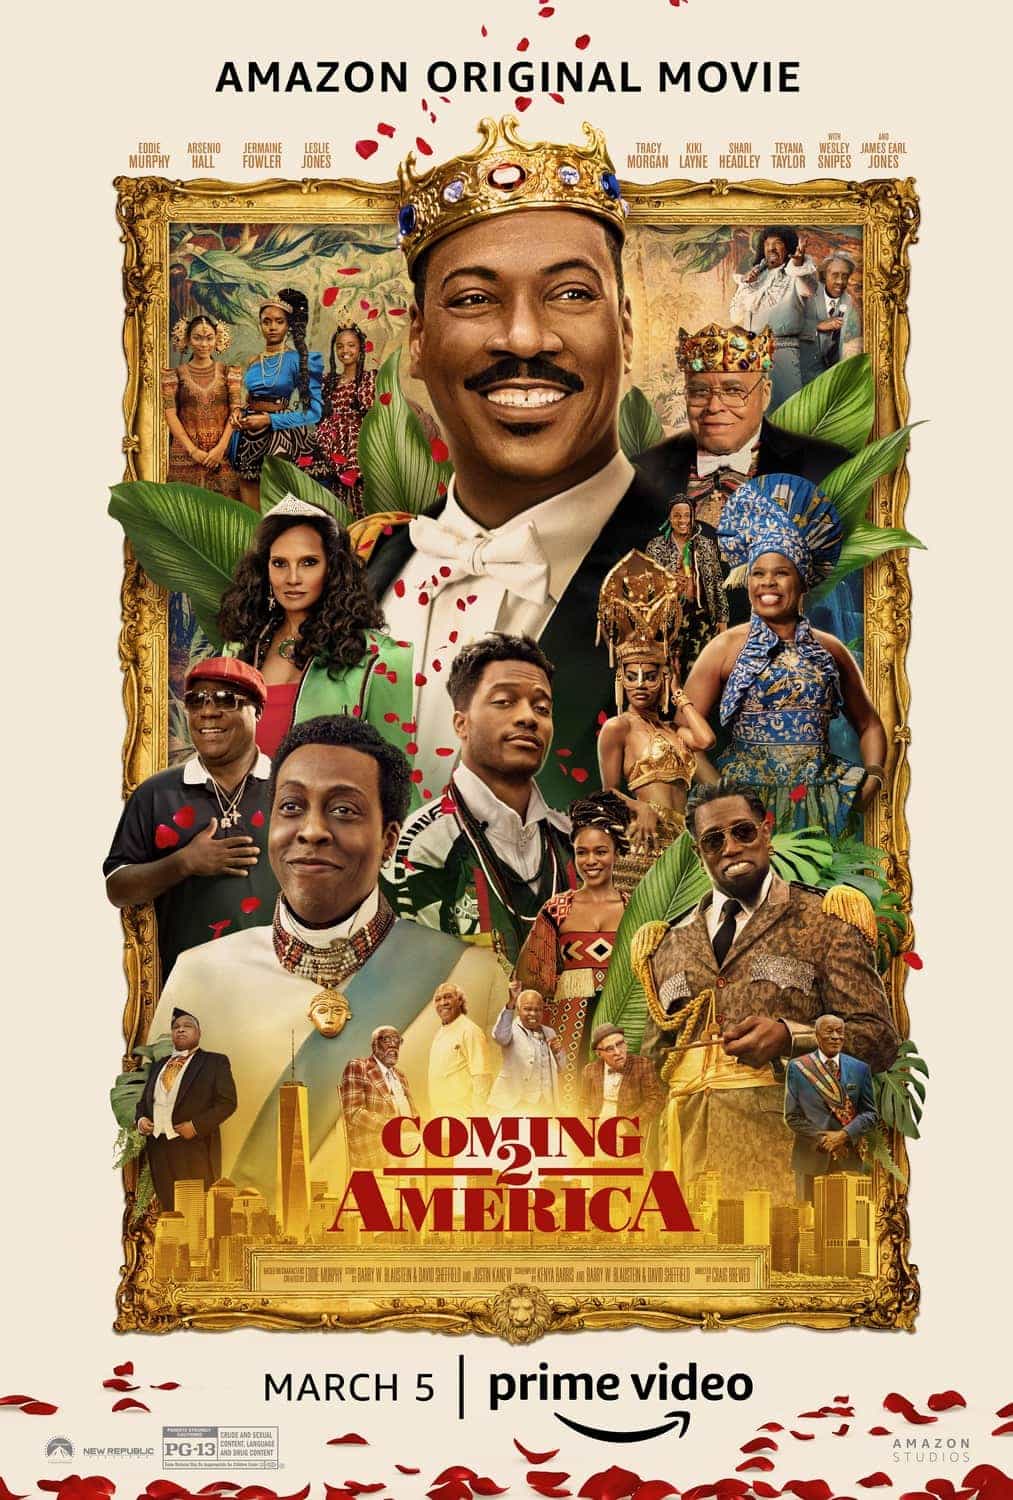 Coming 2 America is given a 12 age rating in the UK for moderate sex references, violence, drug misuse, language, discrimination